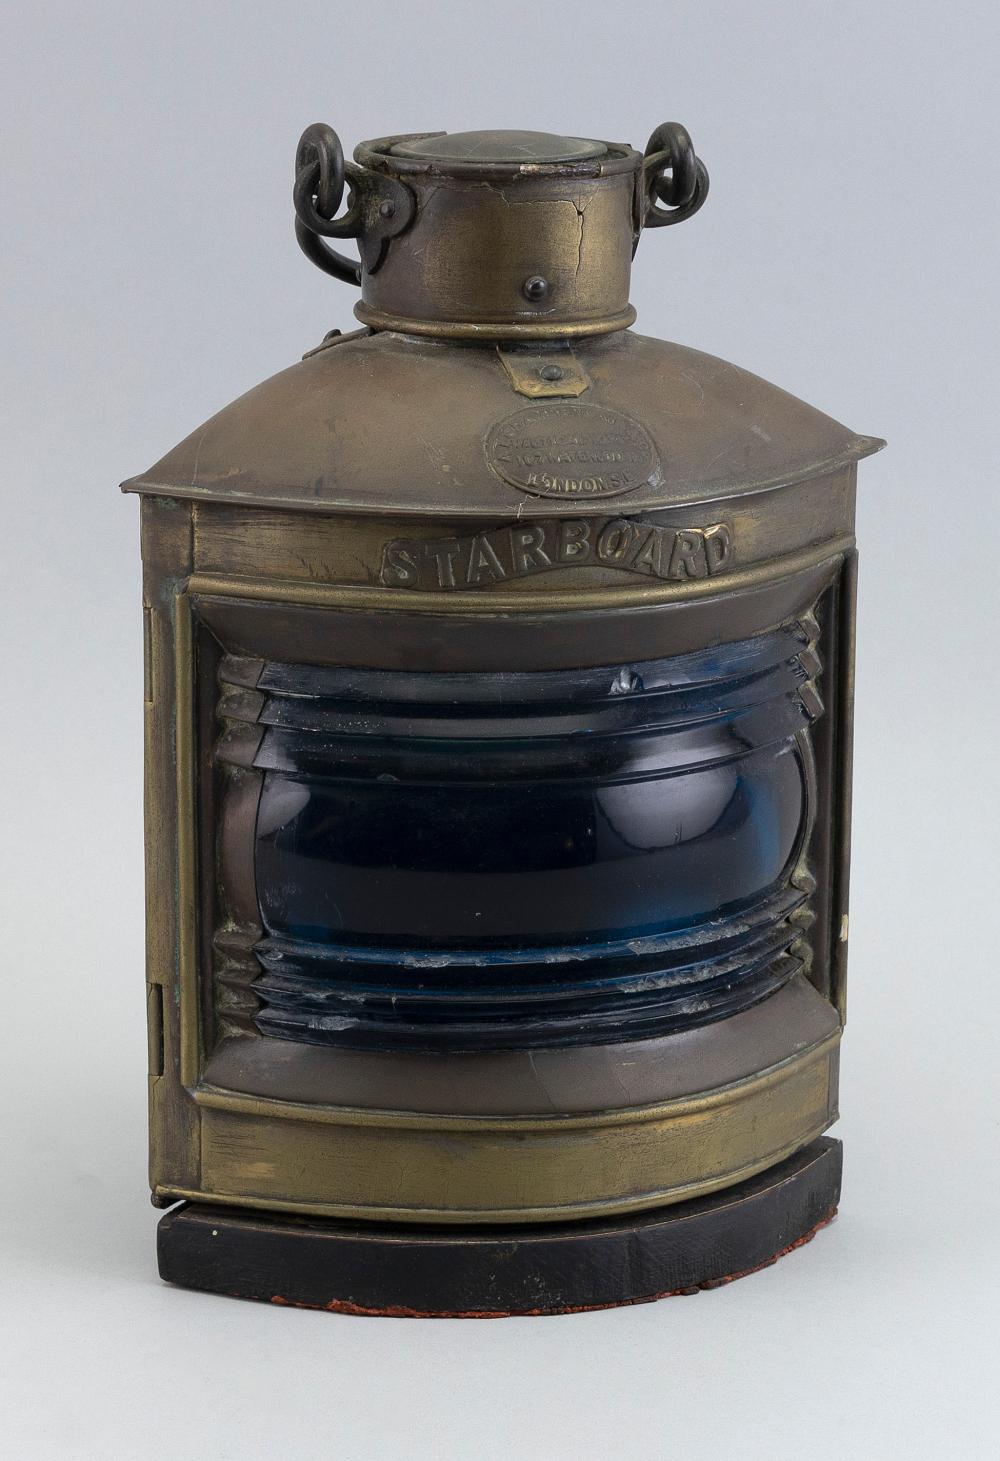 BRASS STARBOARD LANTERN EARLY 20TH 2f1afb